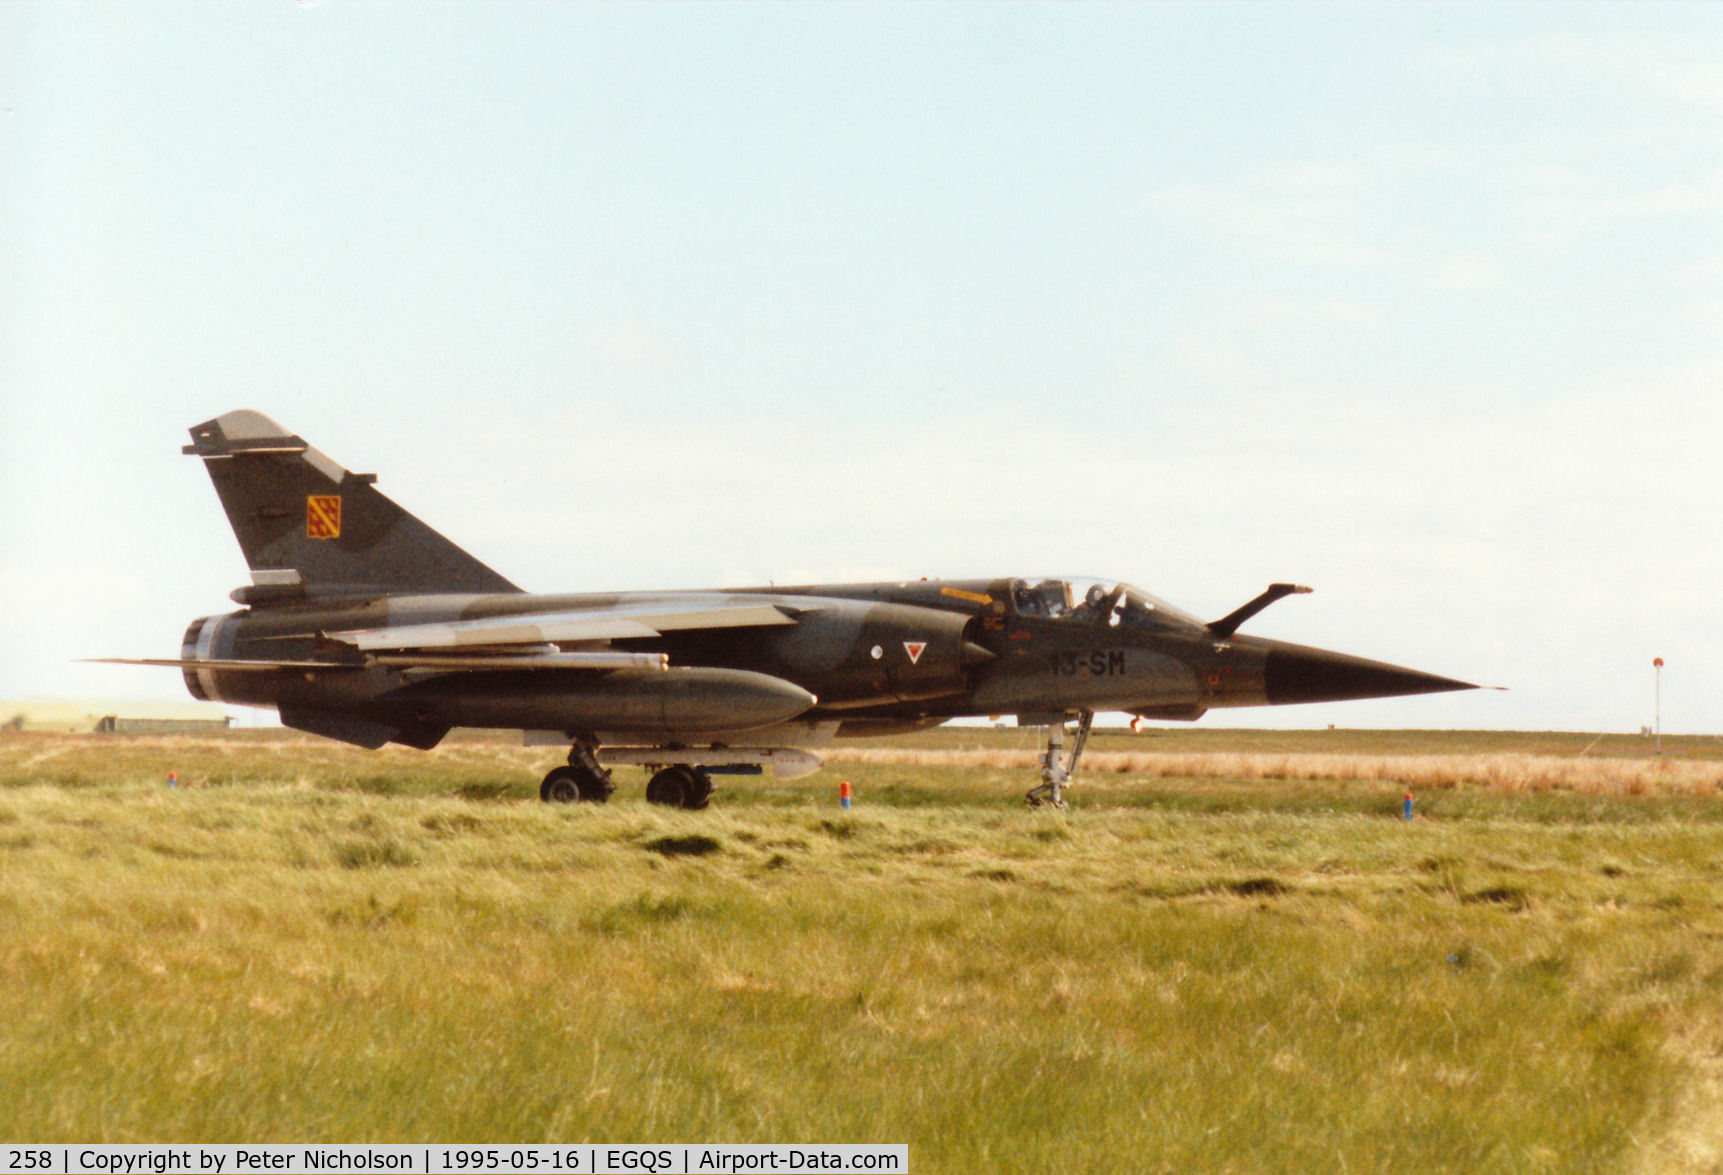 258, Dassault Mirage F.1CT C/N 258, Mirage F.1CT, callsign French Air Force 5722, of EC 1/3 taxying to the active runway at RAF Lossiemouth in the Summer of 1995.